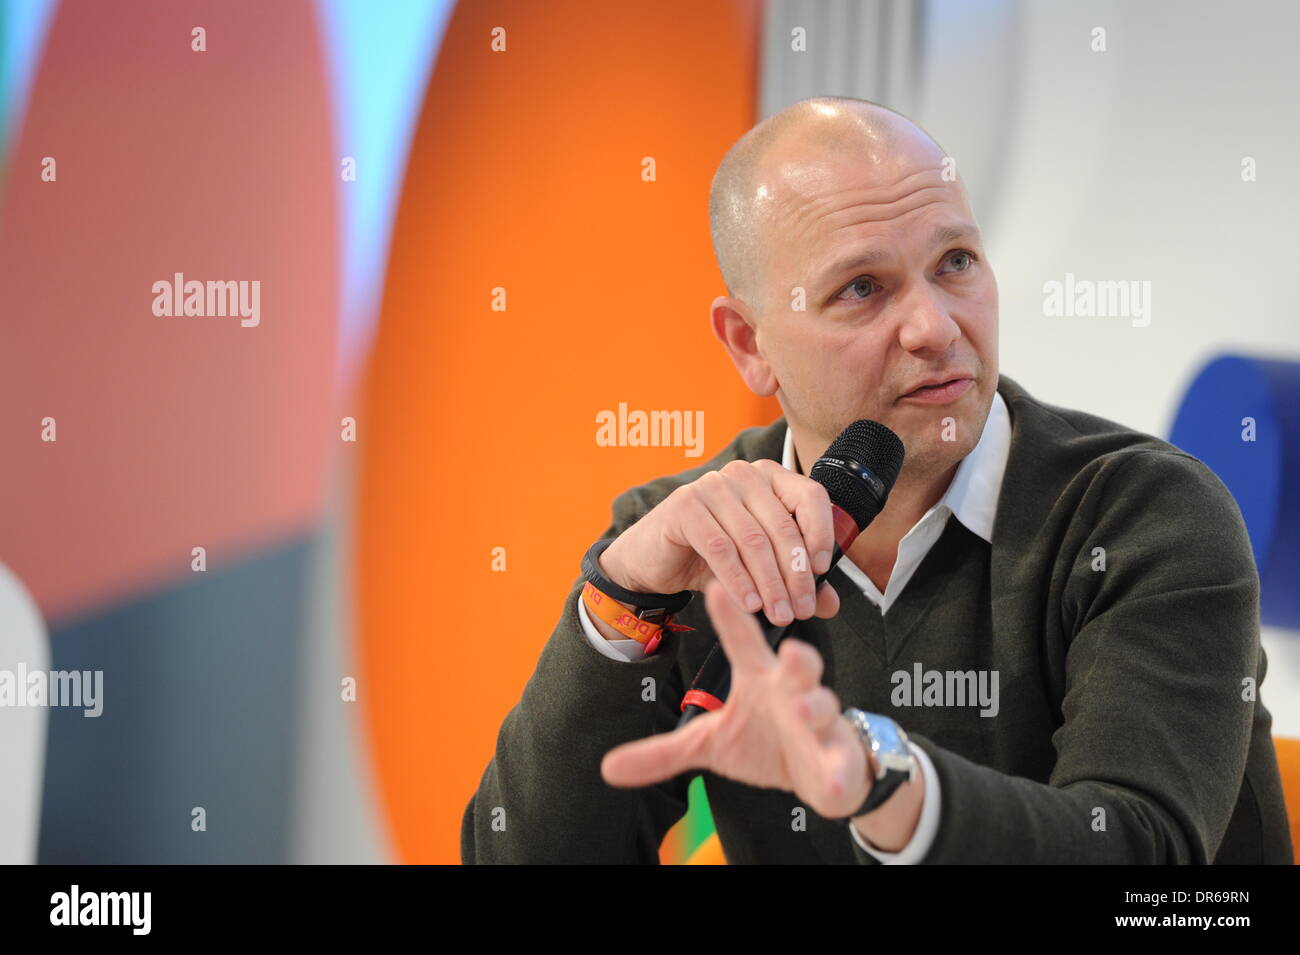 MUNICH/GERMANY - JANUARY 20: Tony Fadell (Nest Labs) gestures on a panel discussion during the Digital Life Design (DLD) Conference at the HVB Forum on January 20, 2014 in Munich, Germany. DLD is a global network on innovation, digitization, science and culture which connects business, creative and social leaders, opinion-formers and influencers for crossover conversation and inspiration. (Photo: picture alliance / Jan Haas) Stock Photo